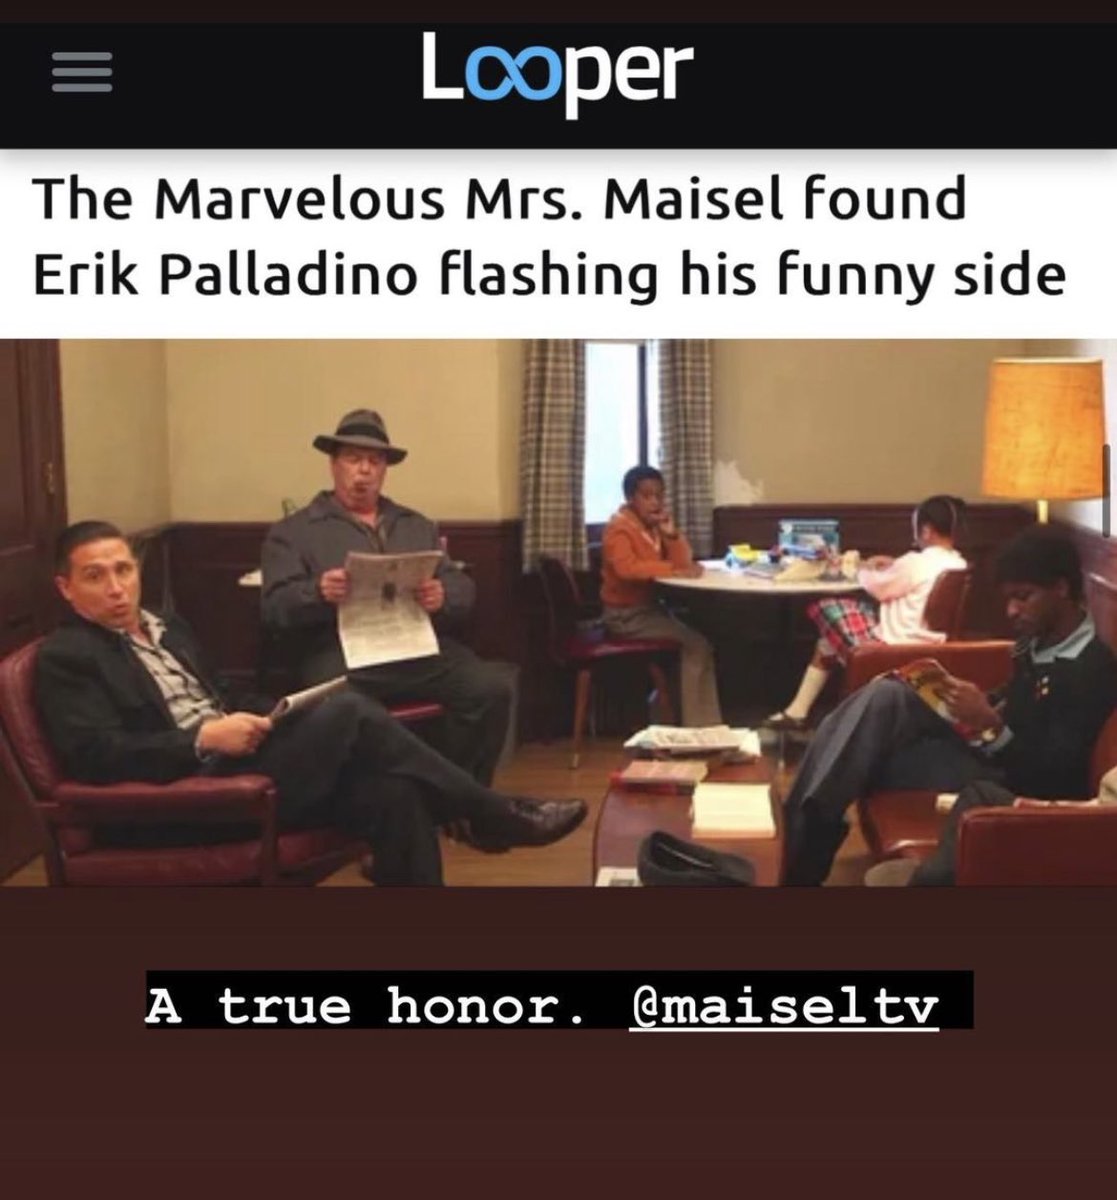 WATCH!  The fifth and final season of THE MARVELOUS MRS. MAISEL on Amazon Prime and watch @erikpalladino at his finest!  Give these characters a spin-off... a period comedic Sopranos!!  #amazonprime #marvelousmrsmaisel #acting